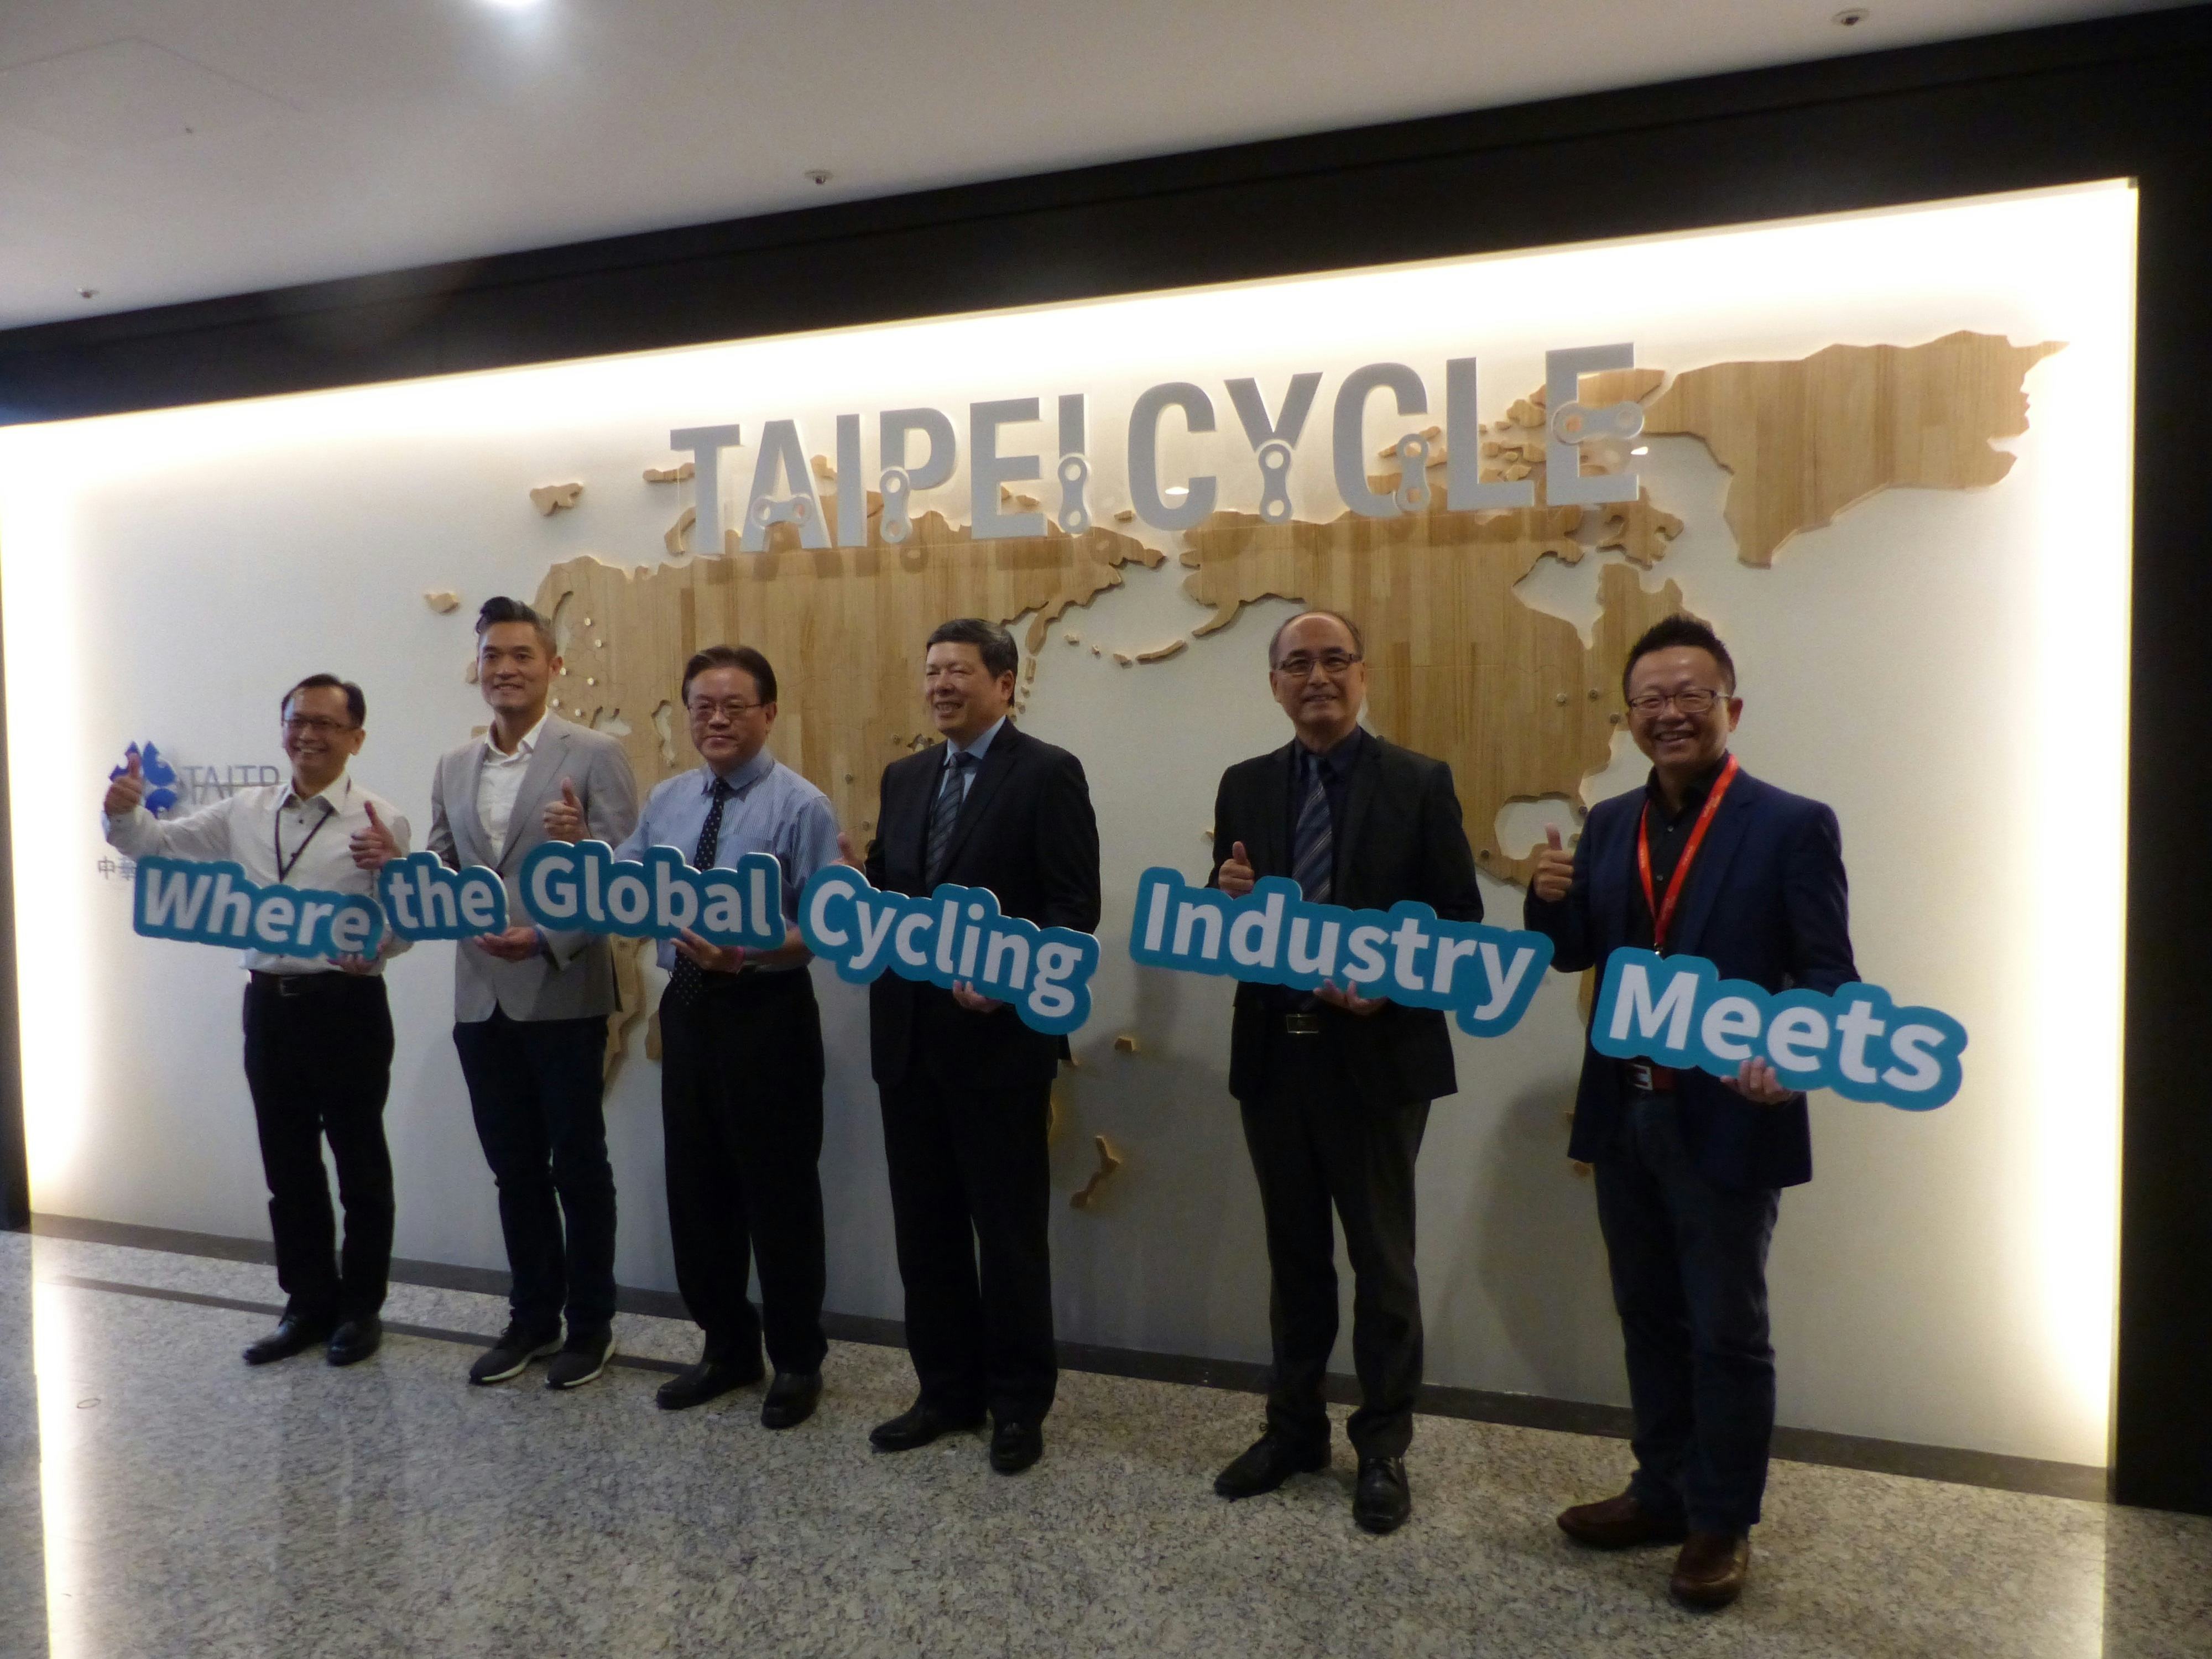 ‘Taiwan’s bicycle industry is entering new era,’ was said at yesterday’s press conference on 2020 Taipei Cycle Show. - Photo Bike Europe